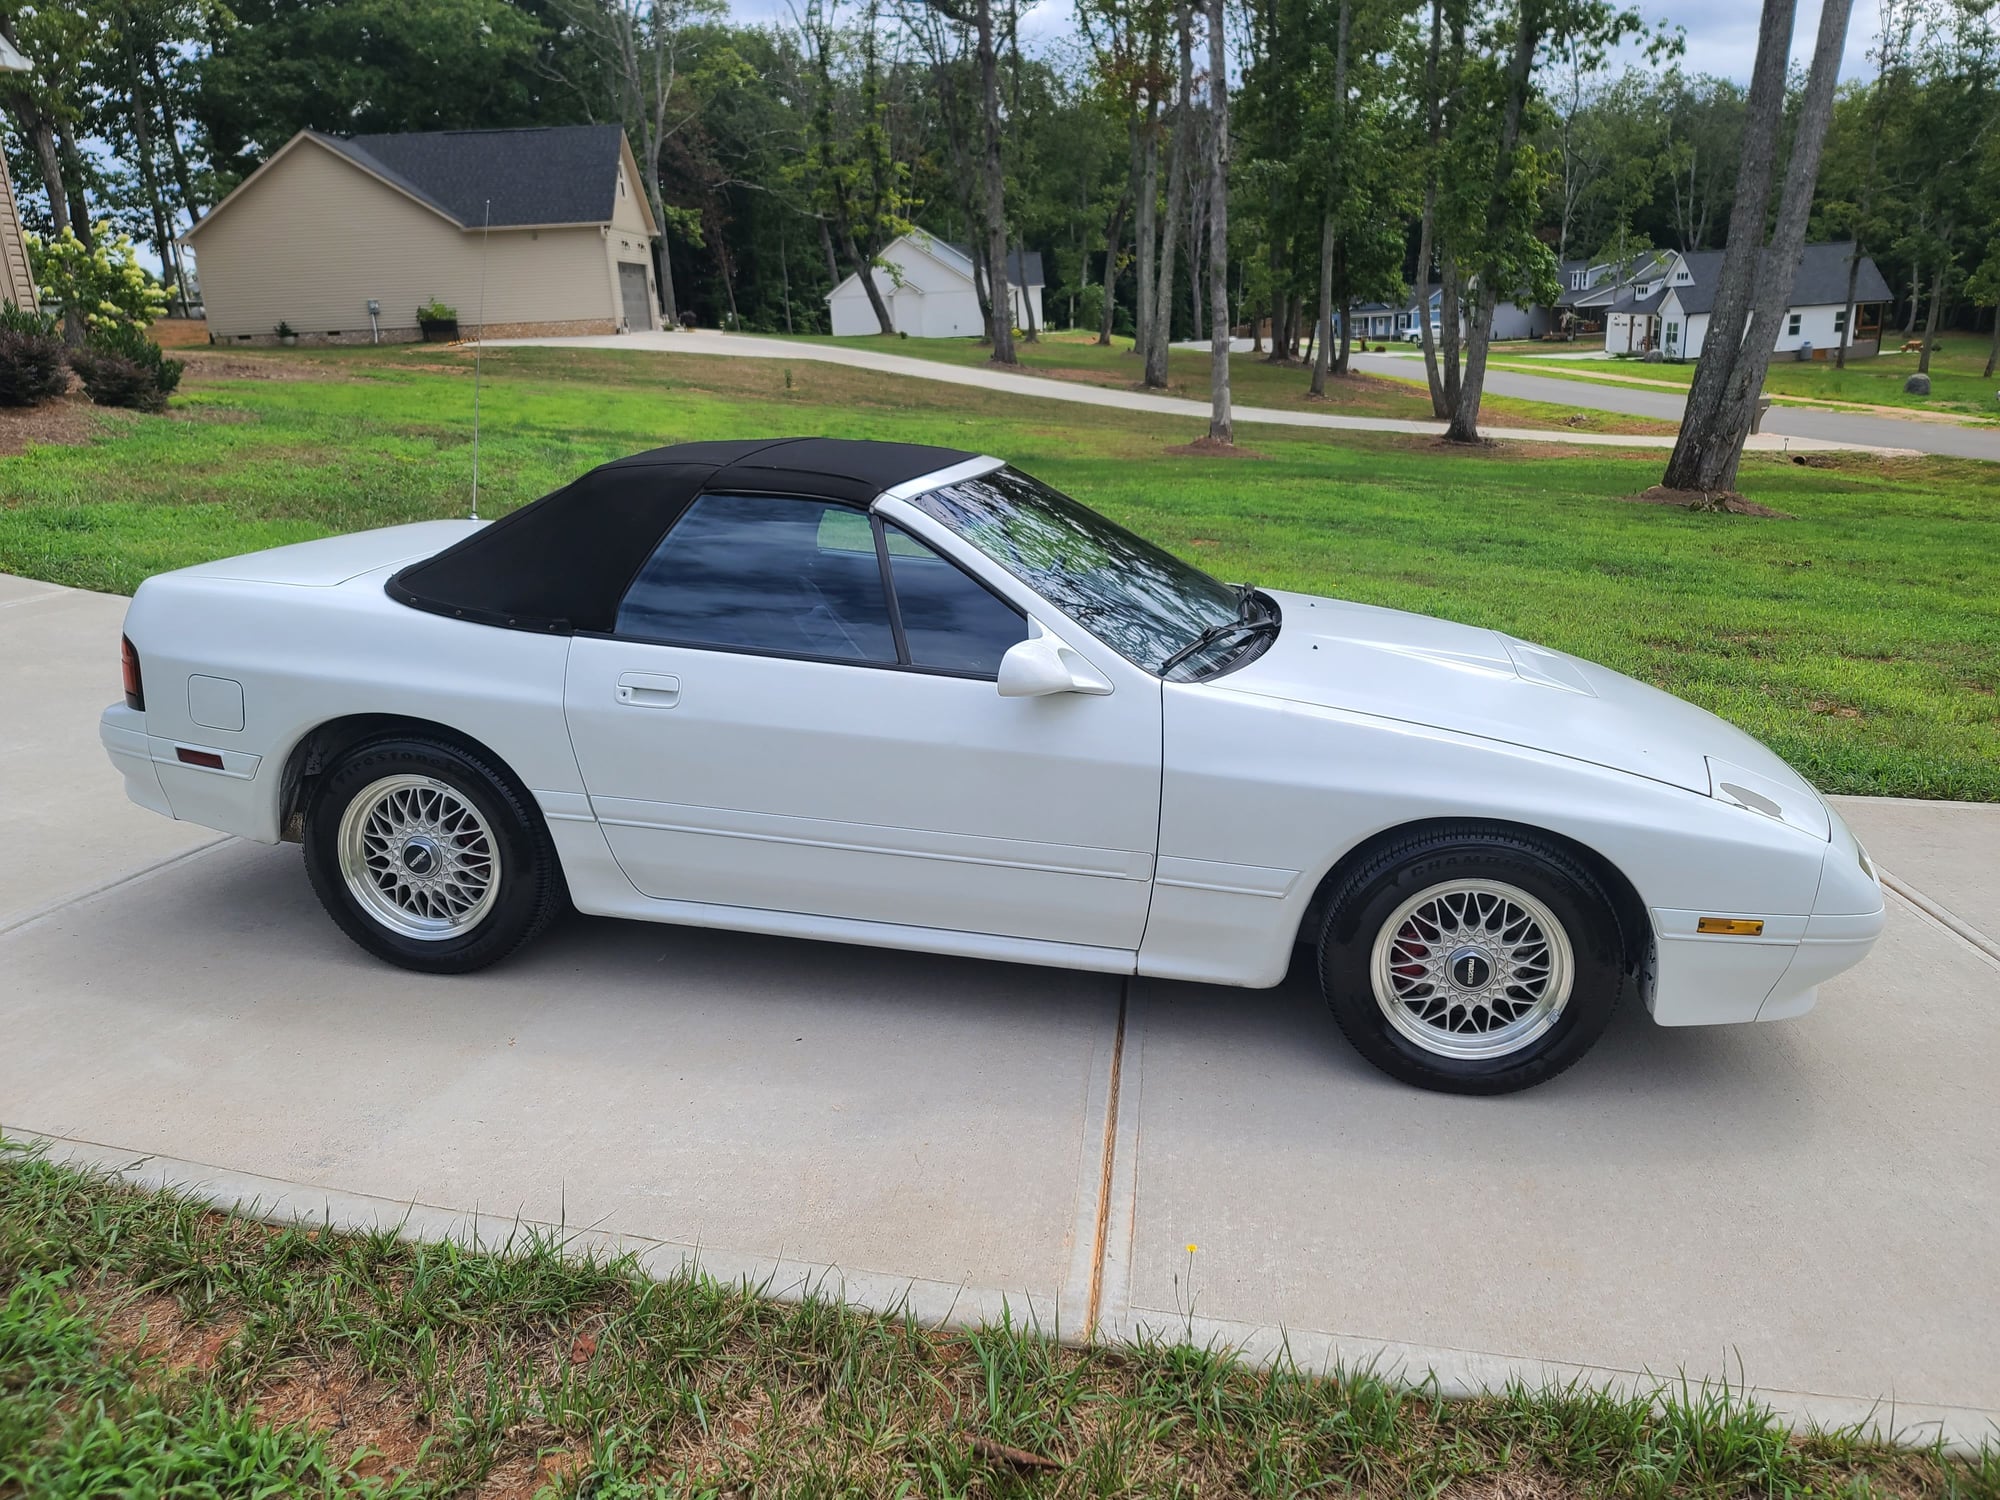 1990 Mazda RX-7 - Garage Kept RX-7 - Used - VIN JM1FC3527L0713107 - 122,000 Miles - 2 cyl - 2WD - Manual - Convertible - White - Concord, NC 28027, United States